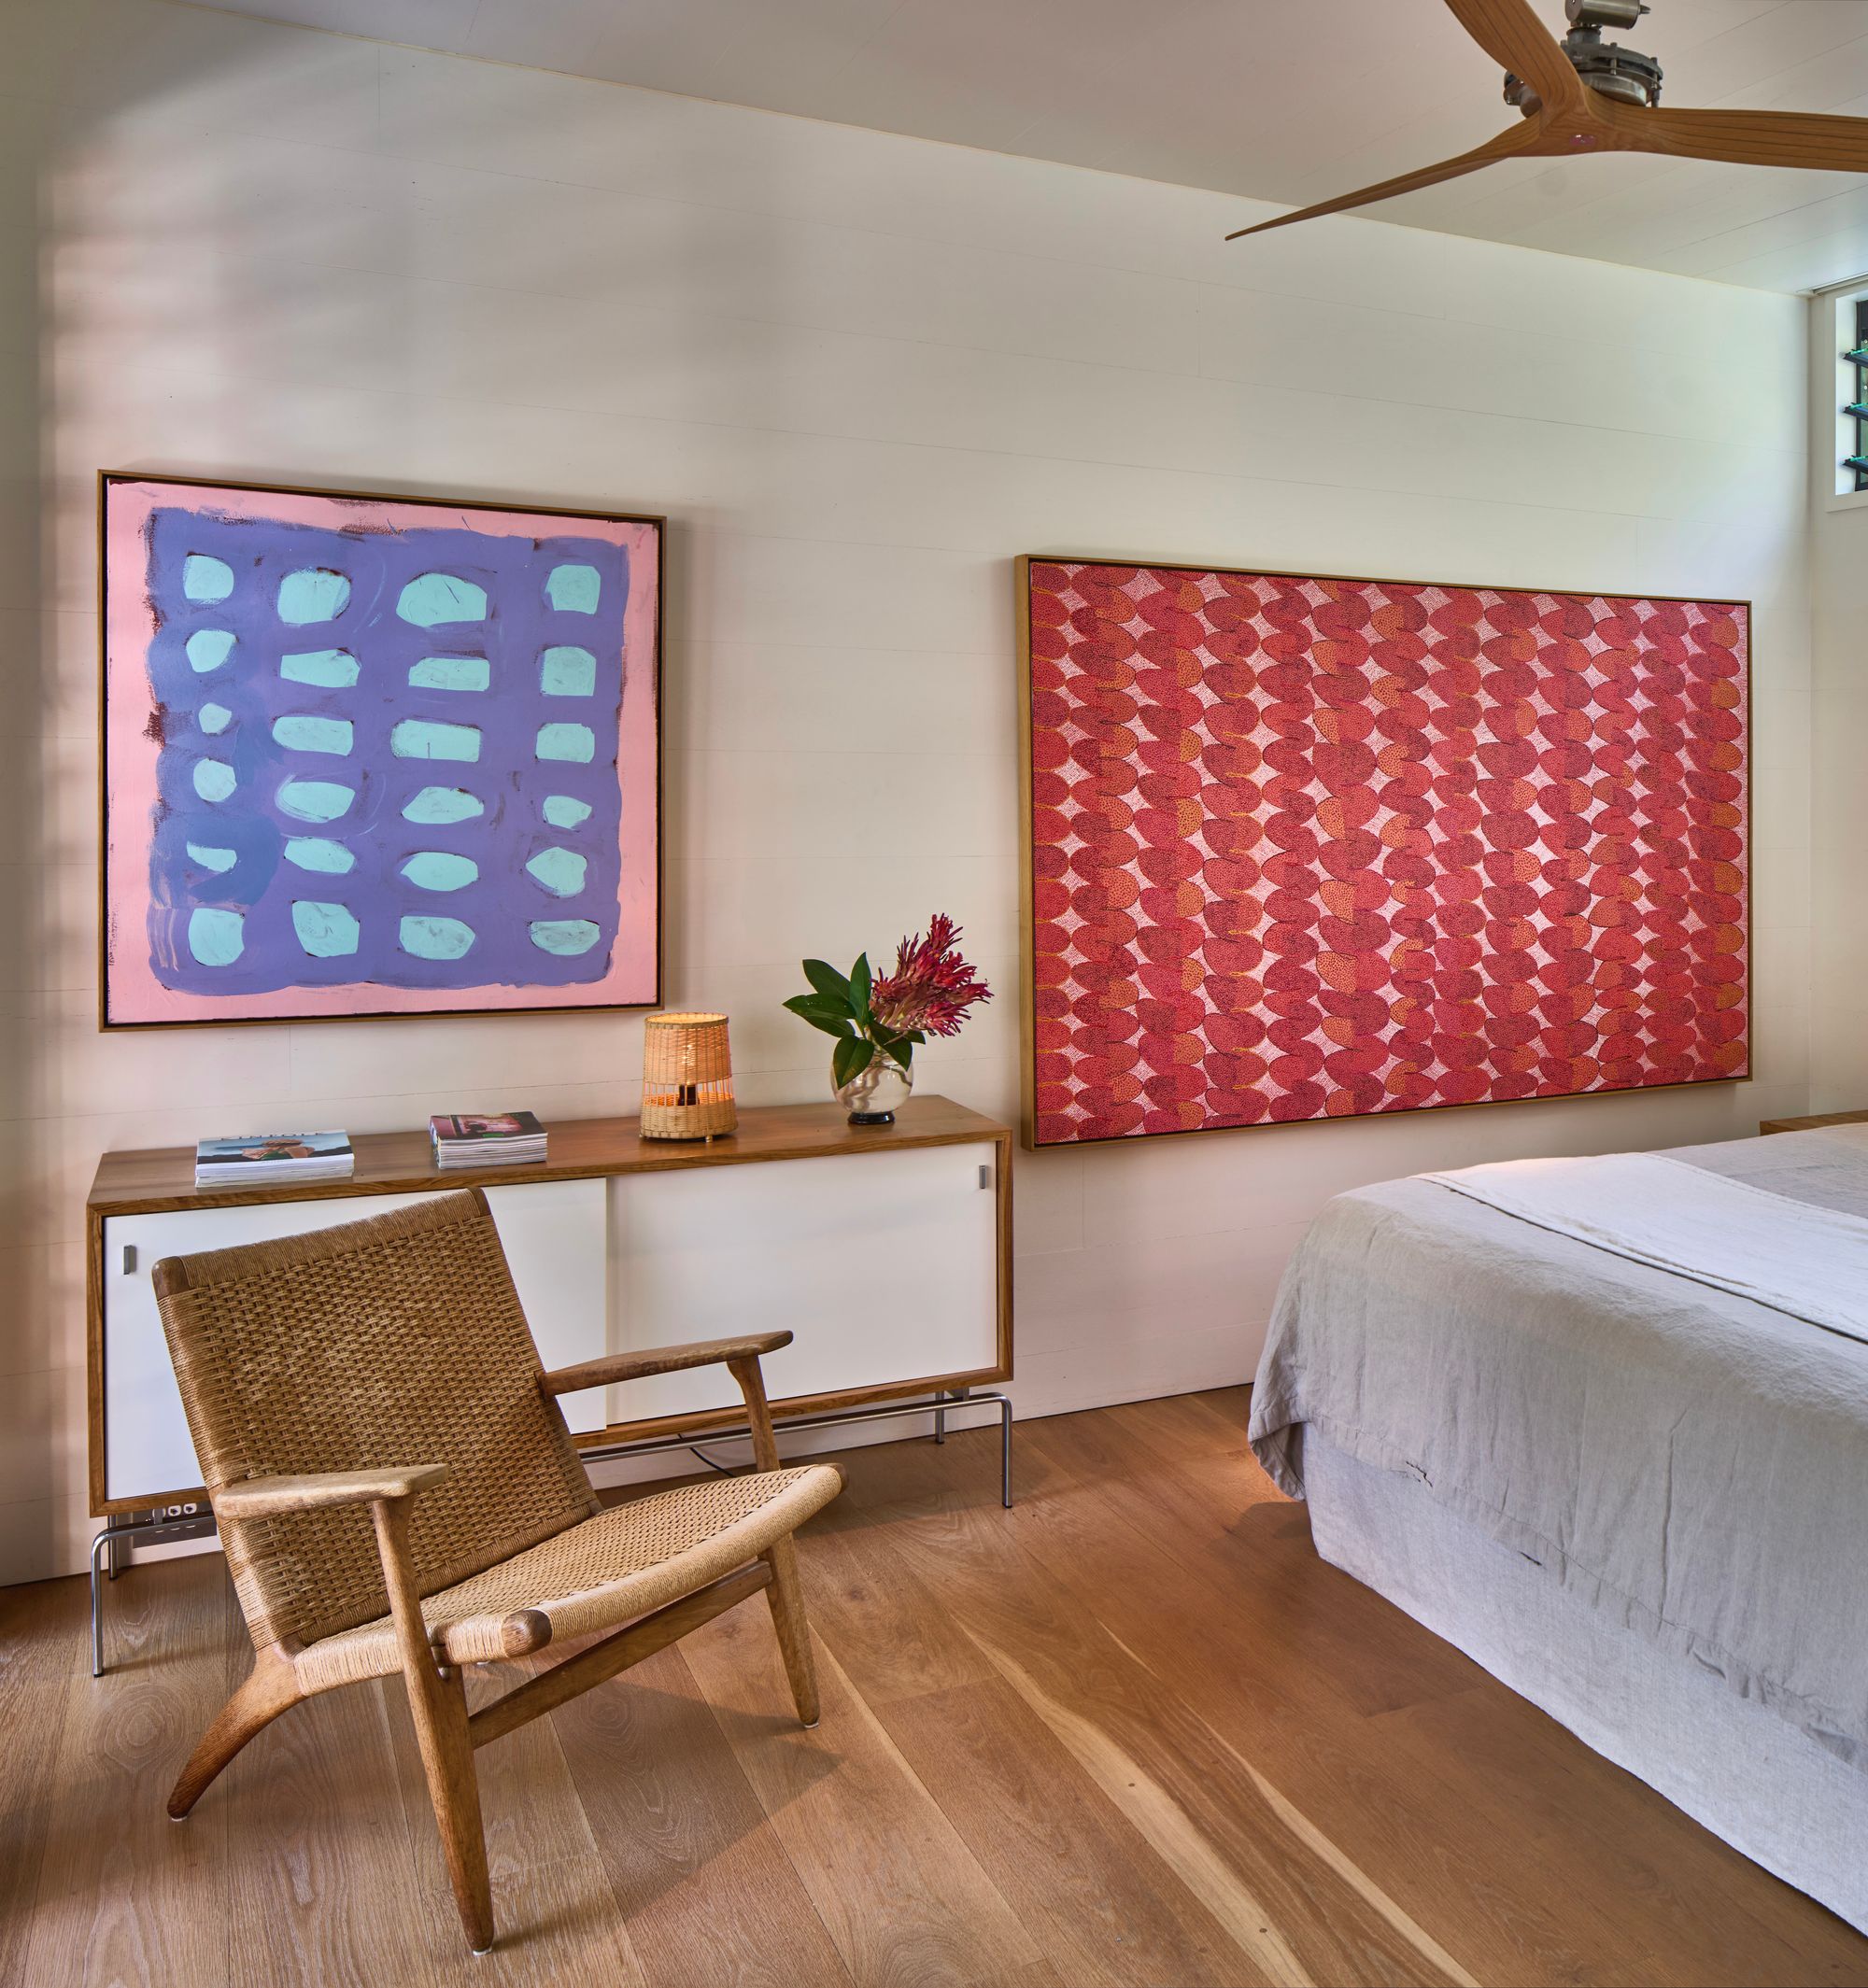 Island House, Lord Howe Island showing bedroom space with an occasional chair